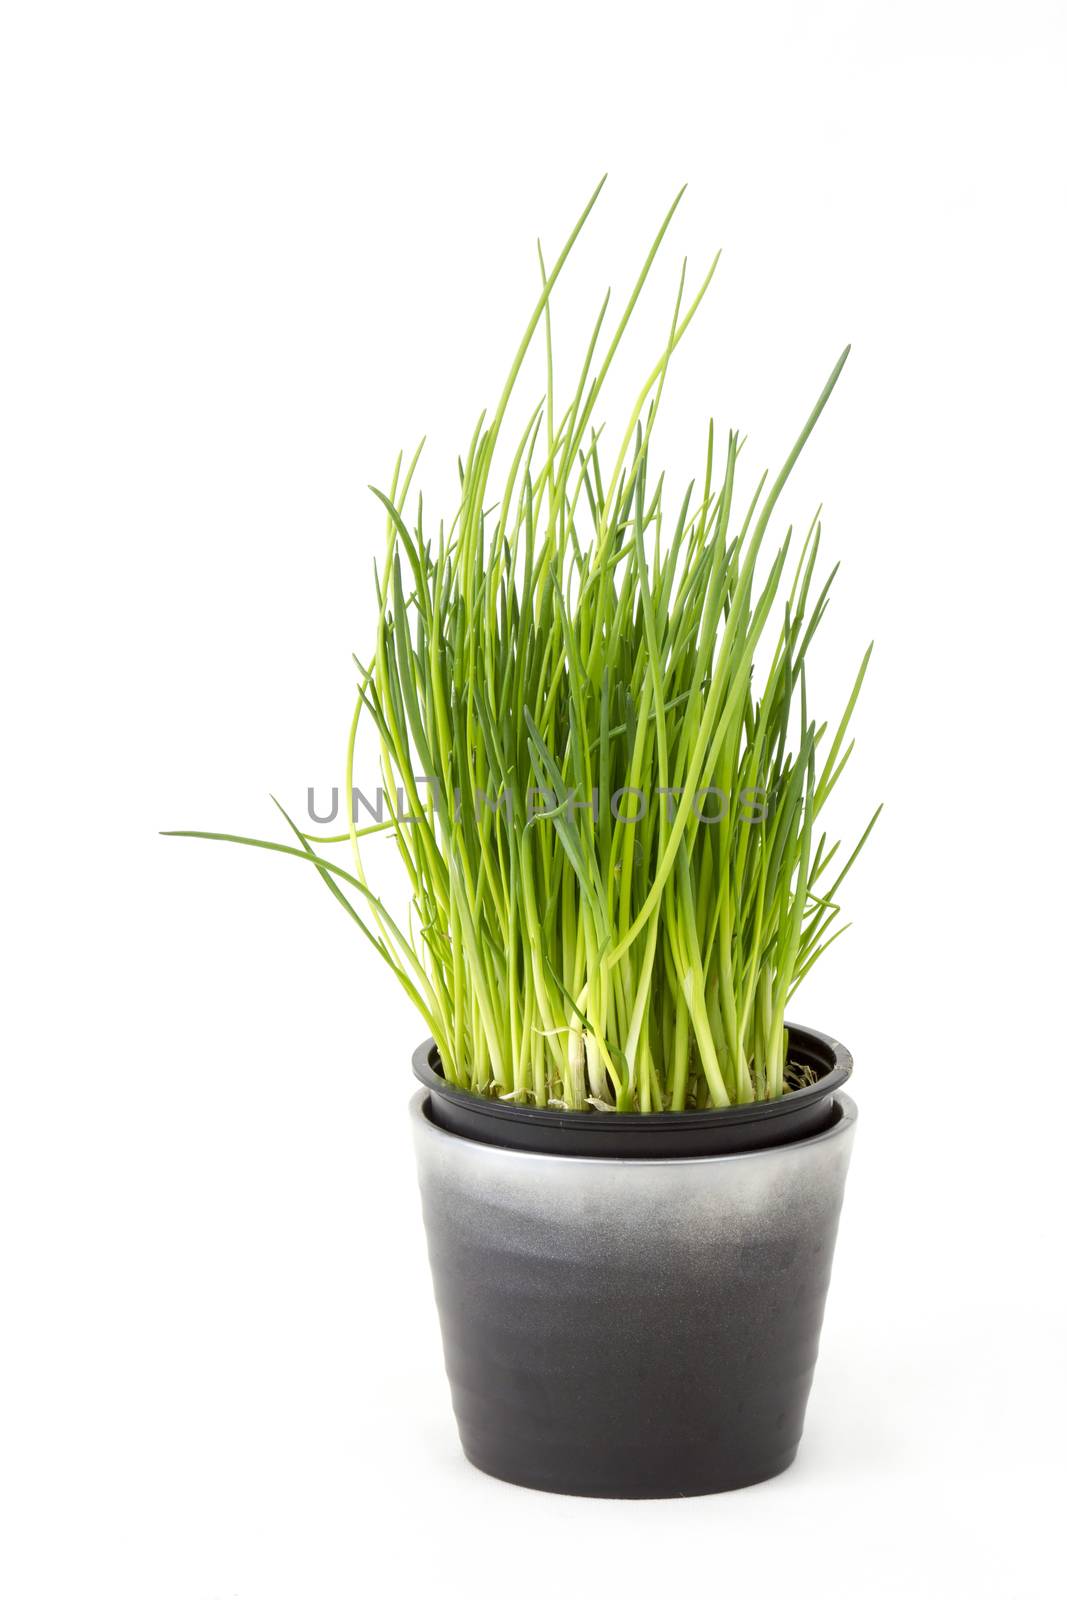 fresh chives in a pot on white background